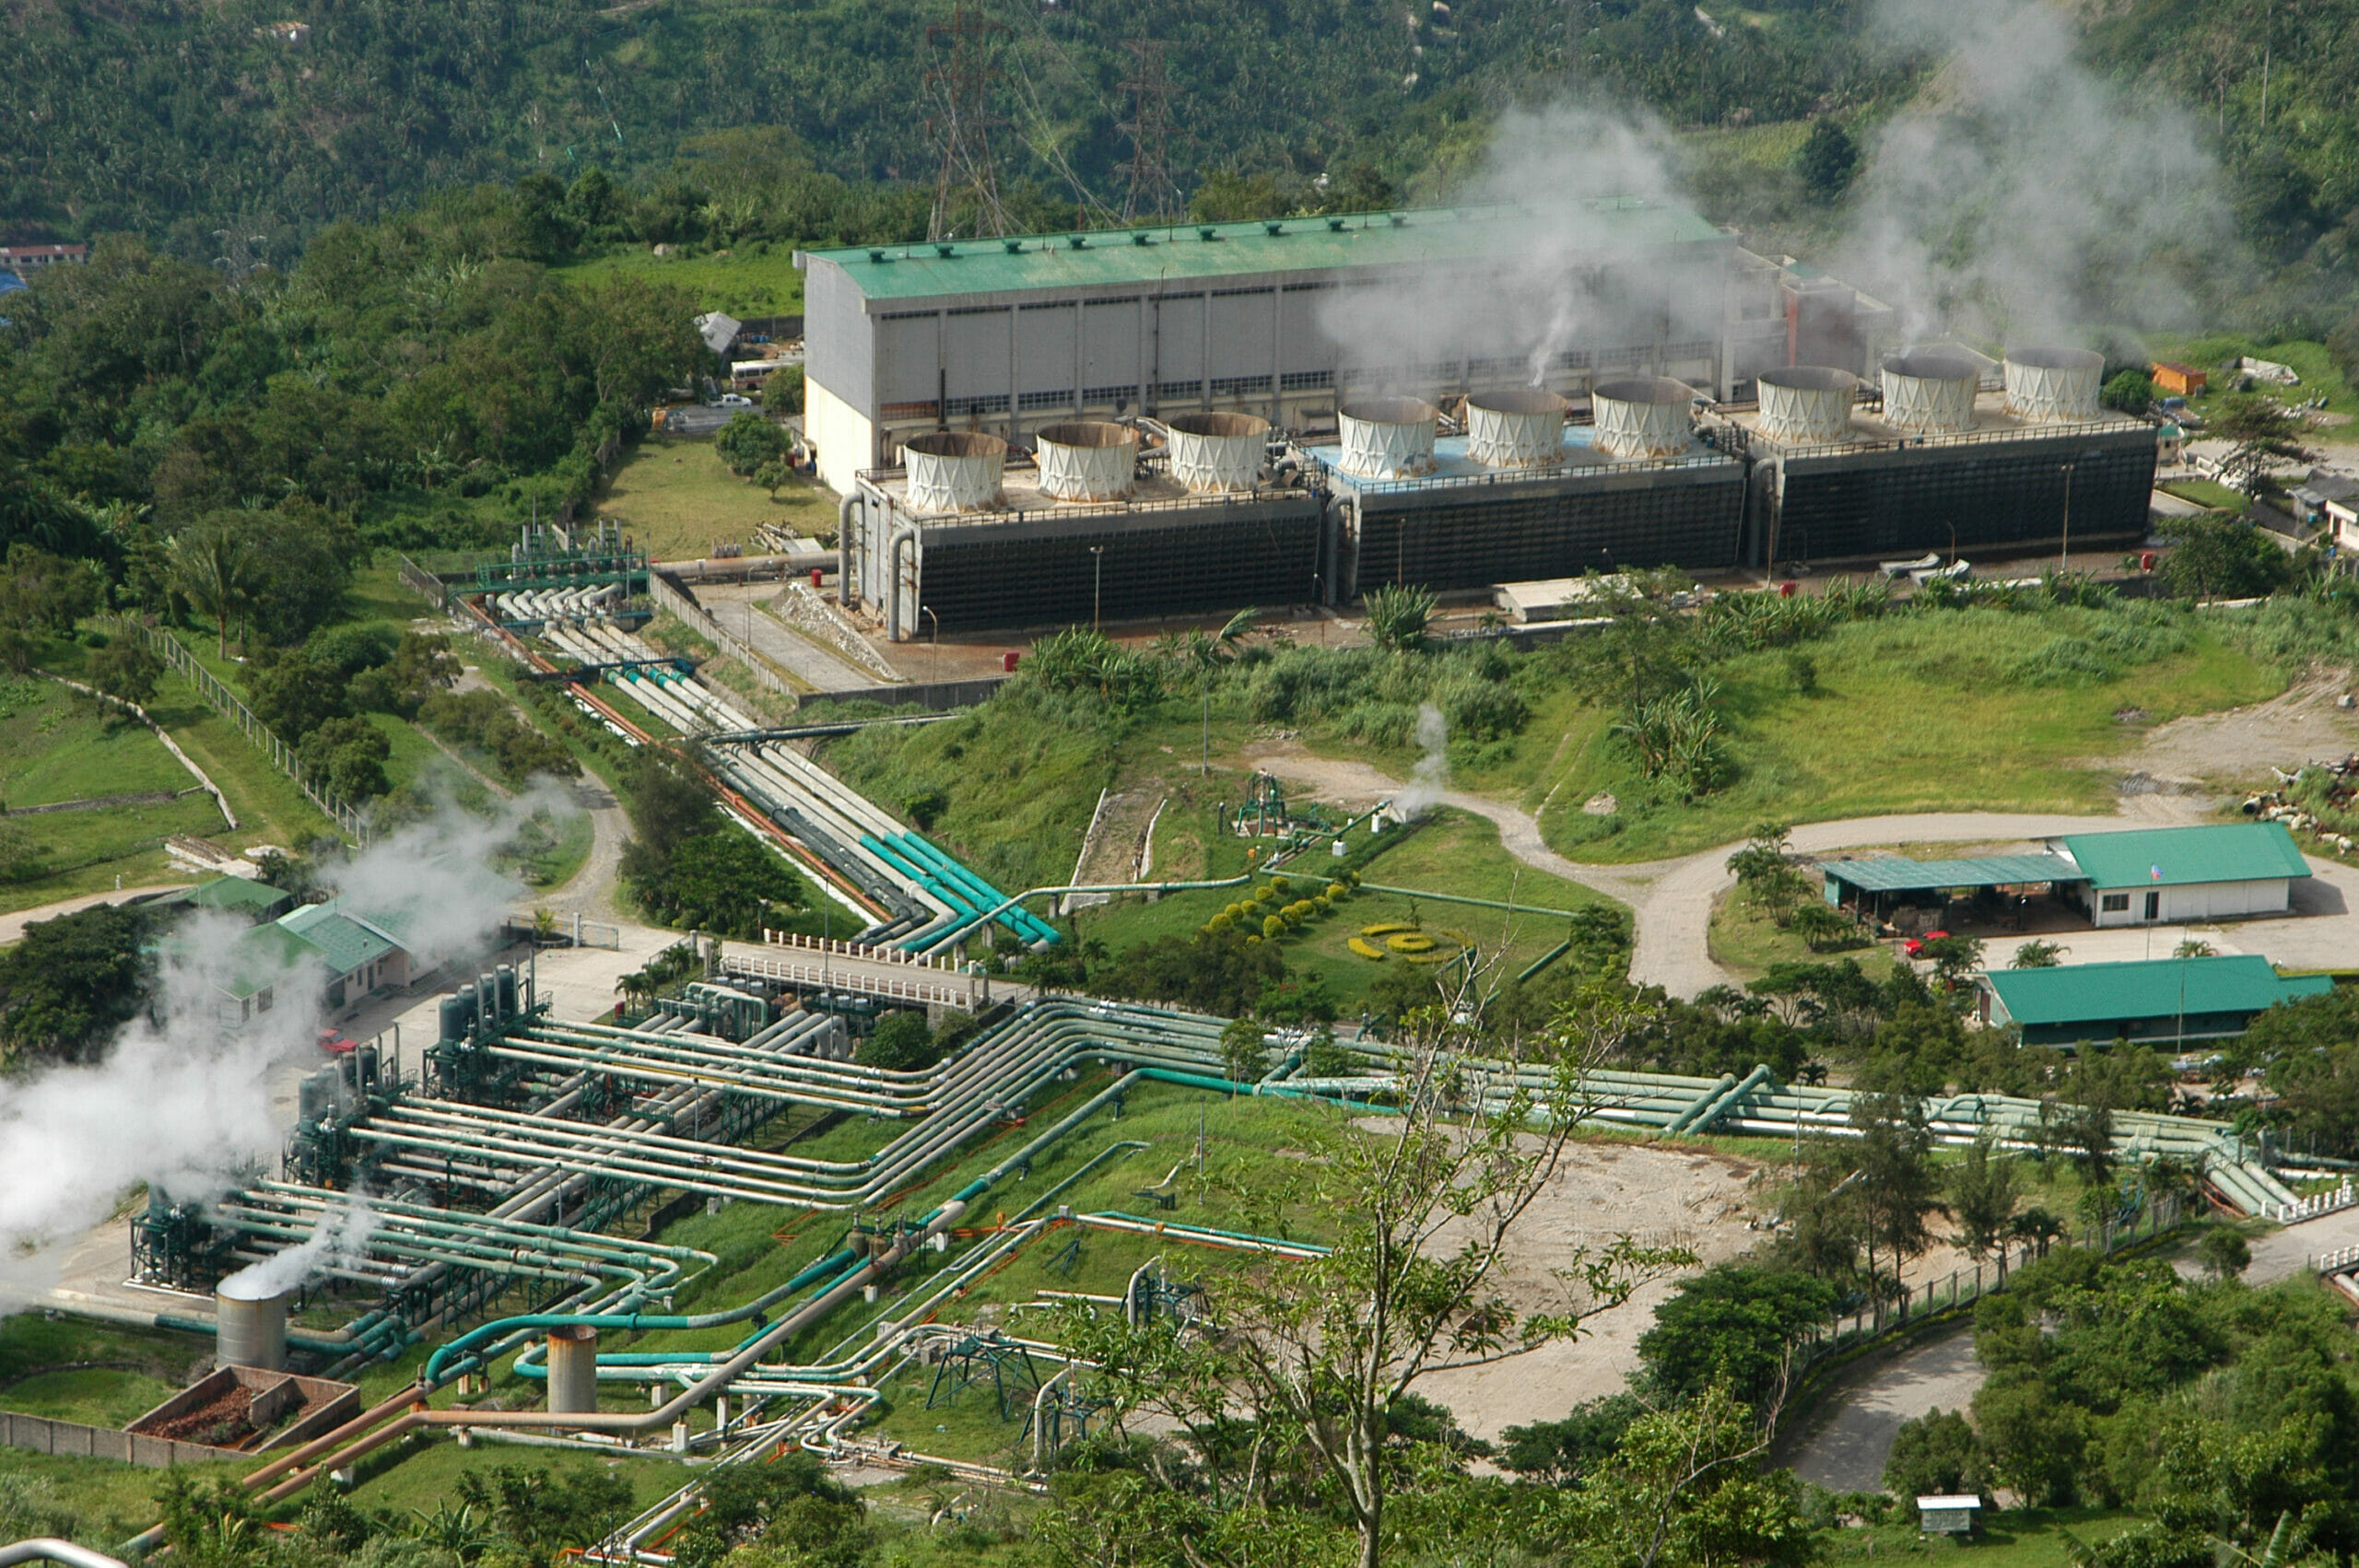 B&W Continues Work On Costa Rican Geothermal Project